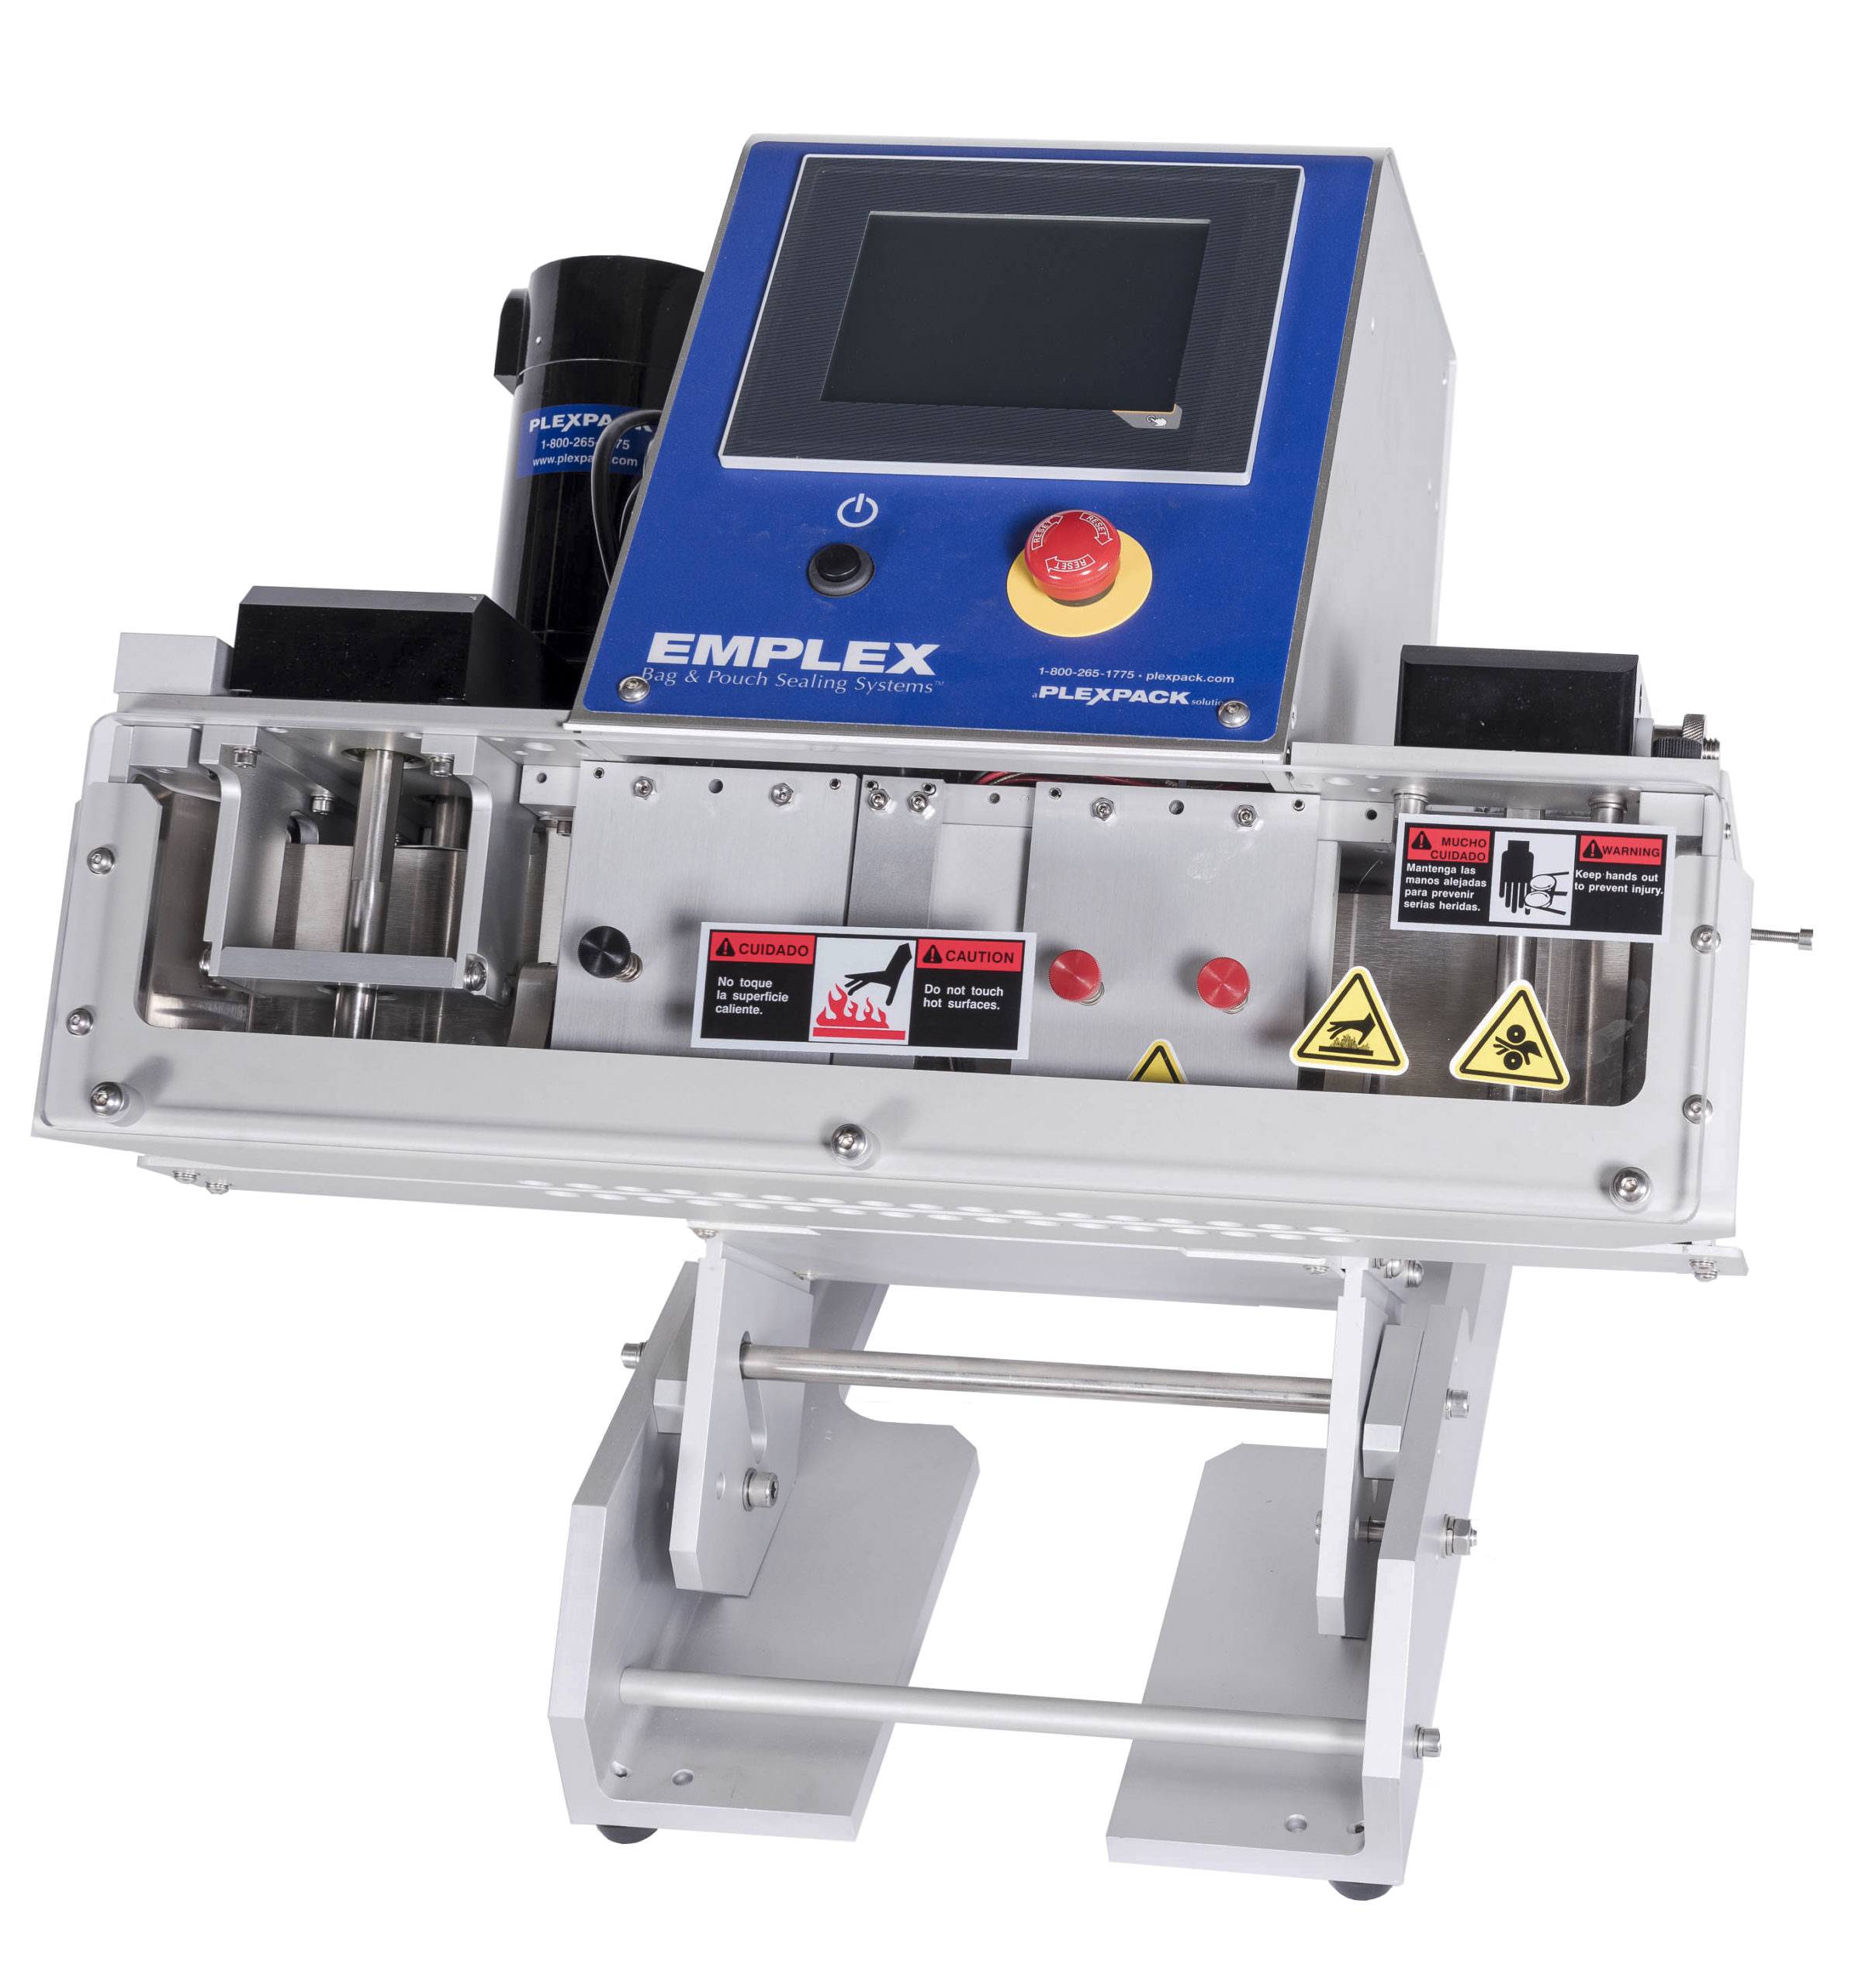 MPS6140 continuous band sealer tabletop